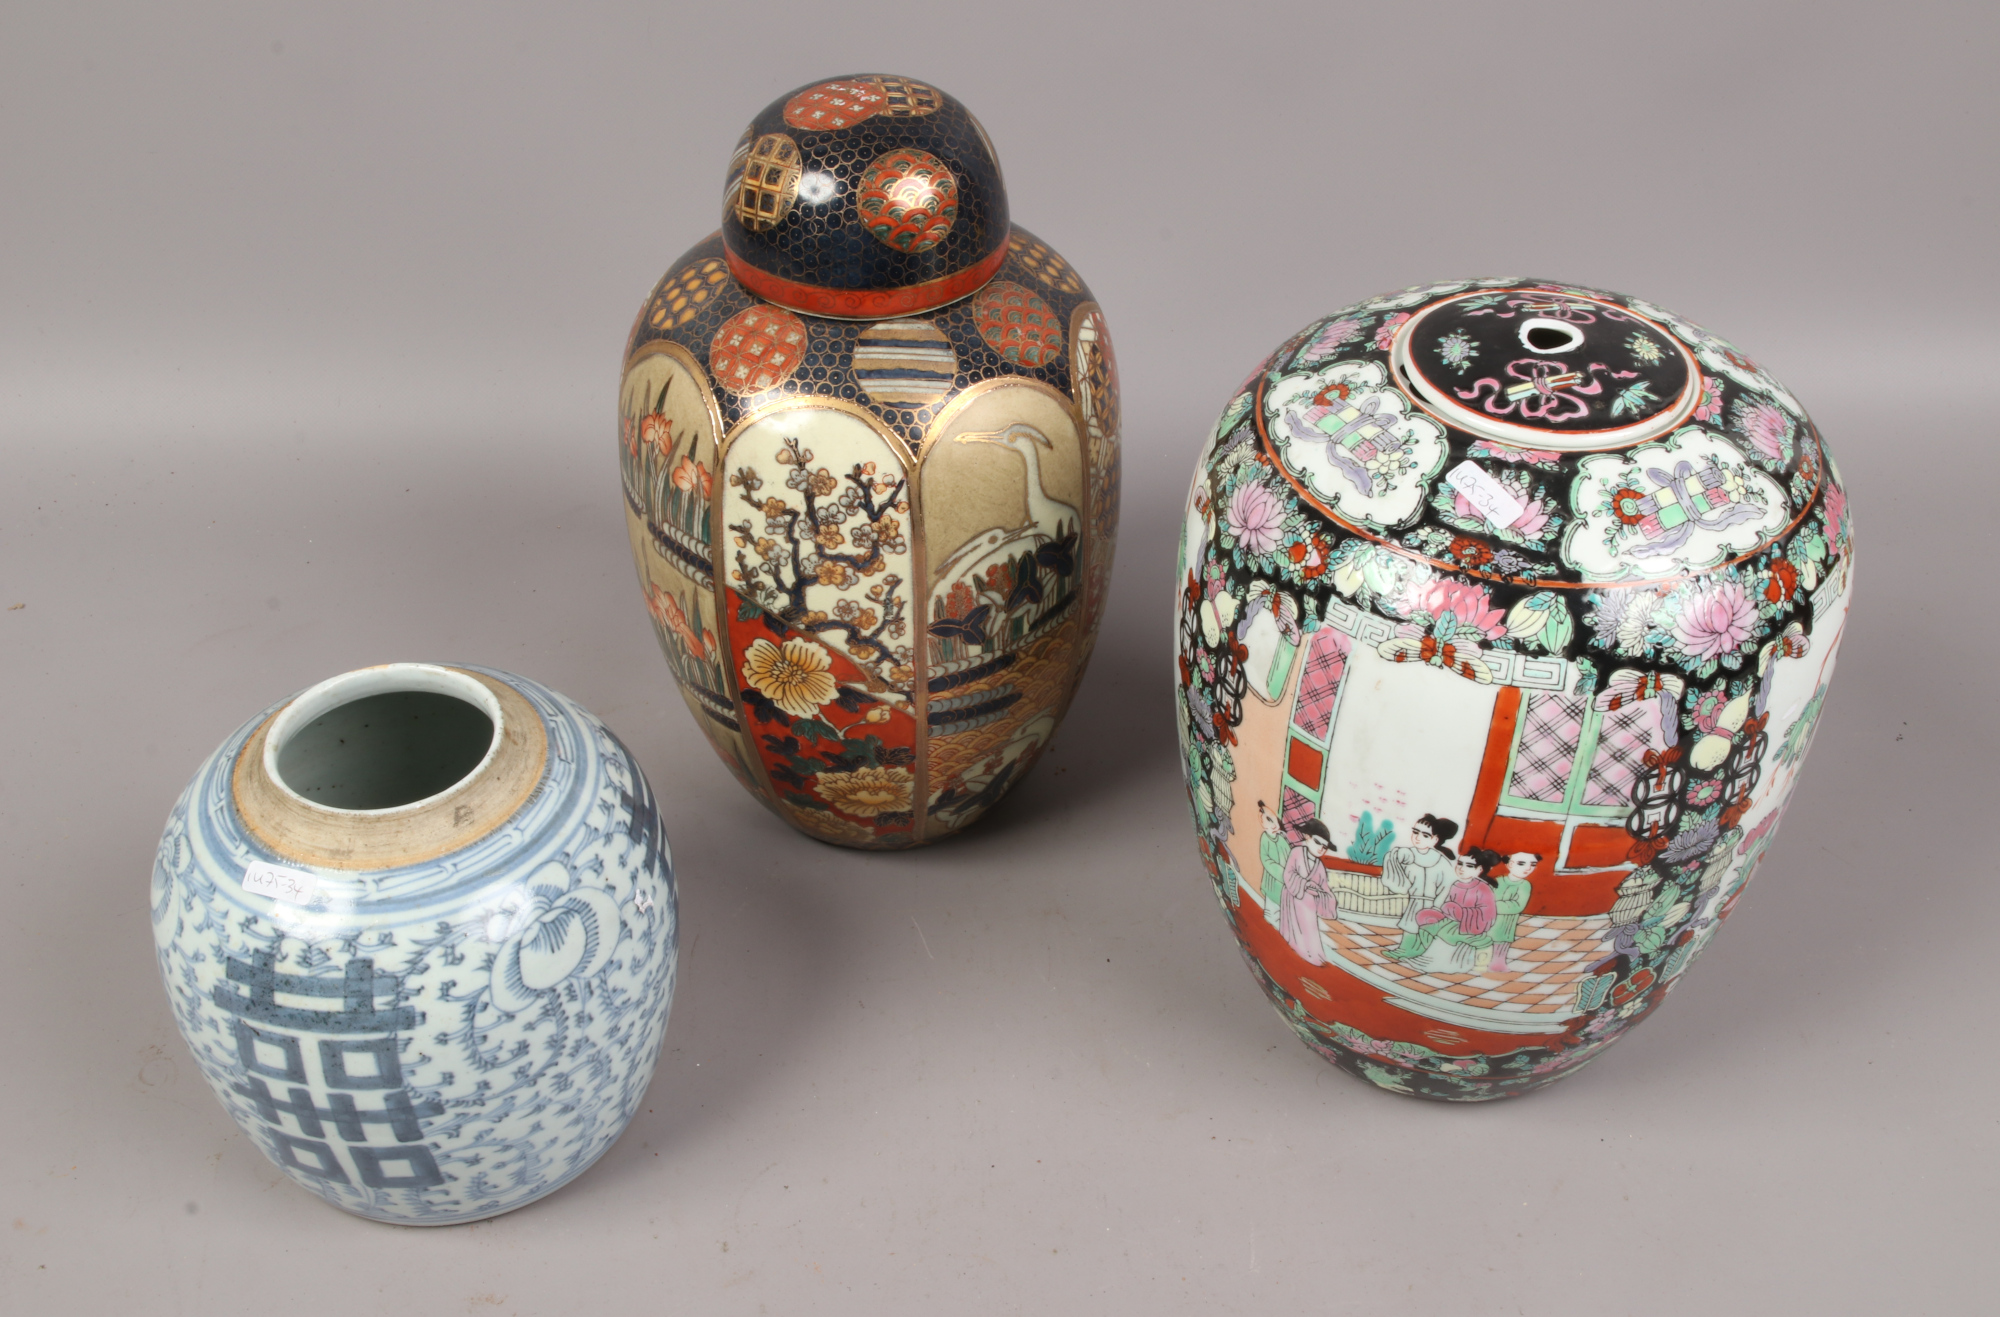 A provincial 18th century Chinese blue and white ginger jar and two modern decorative Chinese jars.